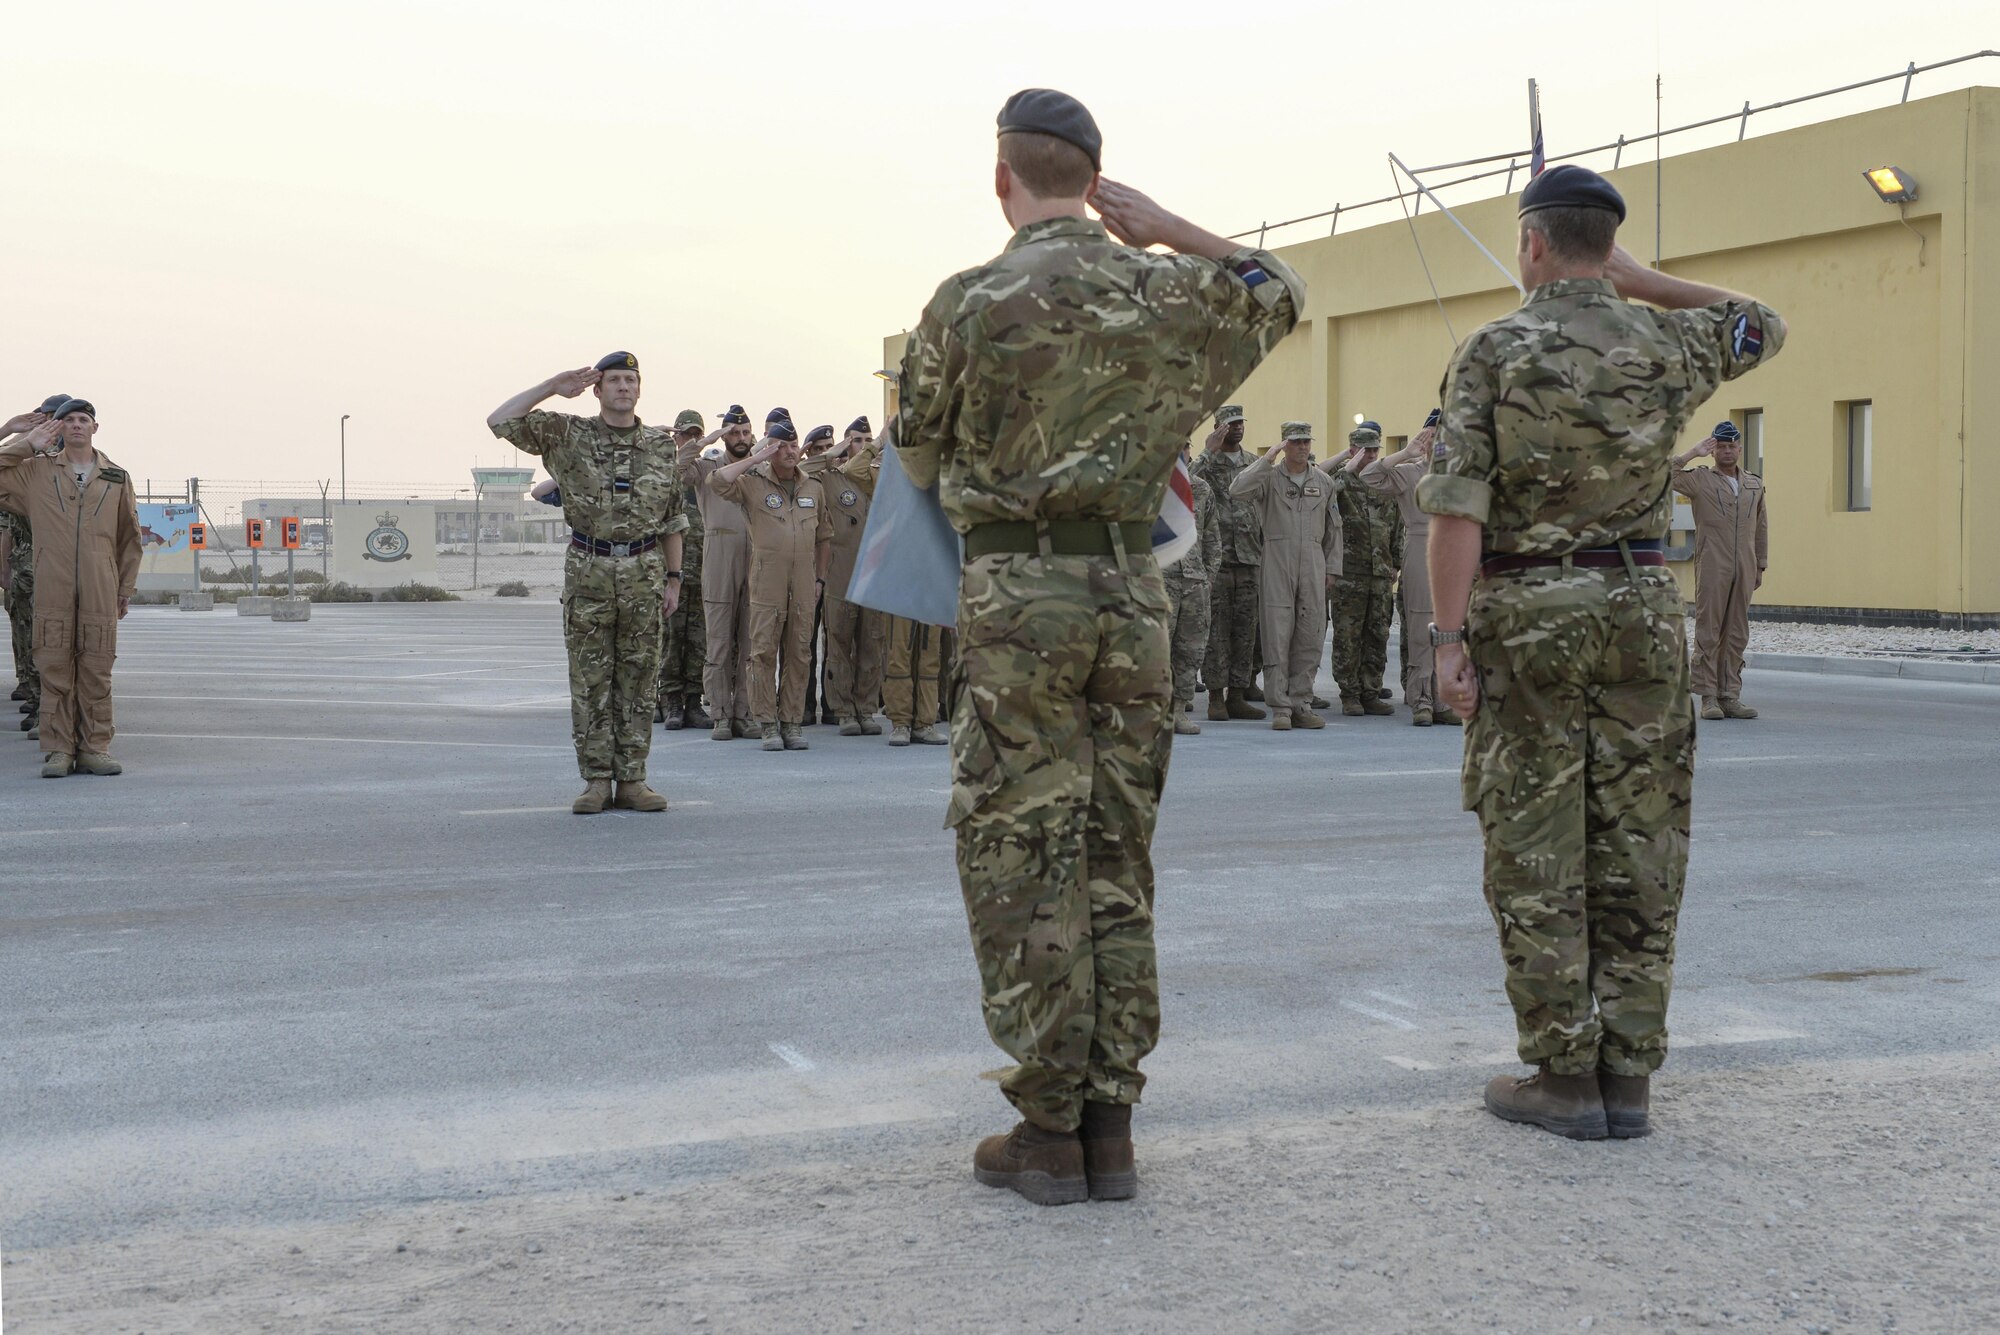 United Kingdom Air Component Commander and Air Officer Commanding 83 Expeditionary Air Group, Air Commodore Johnny Stringer, right center, addresses UK forces along with various leaders from the coalition forces following the Battle of Britain commemoration ceremony at Al Udeid Air Base, Qatar, Sept. 16, 2017.